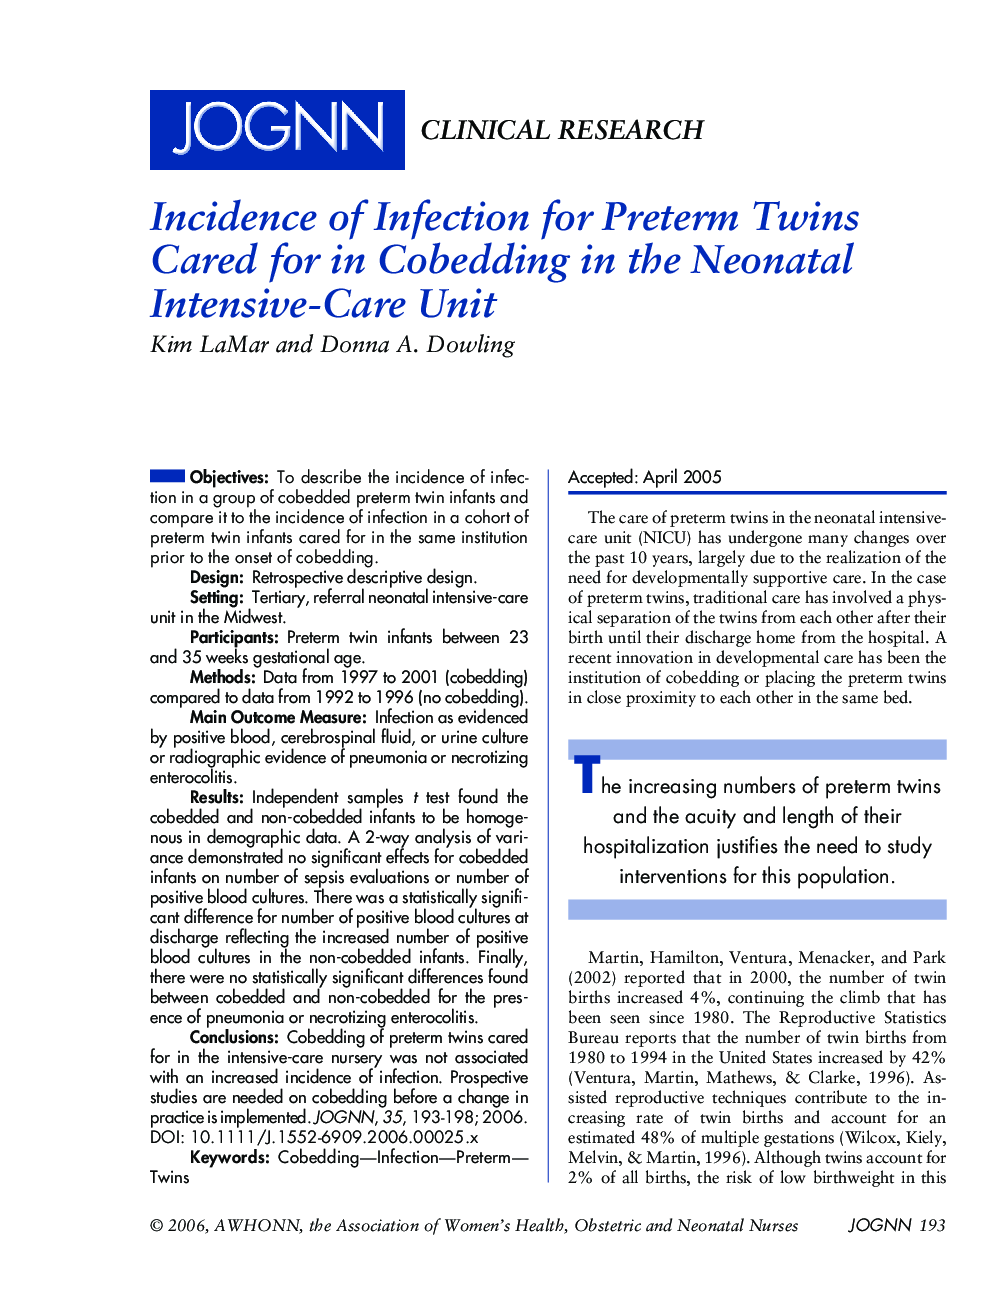 Incidence of Infection for Preterm Twins Cared for in Cobedding in the Neonatal IntensiveâCare Unit